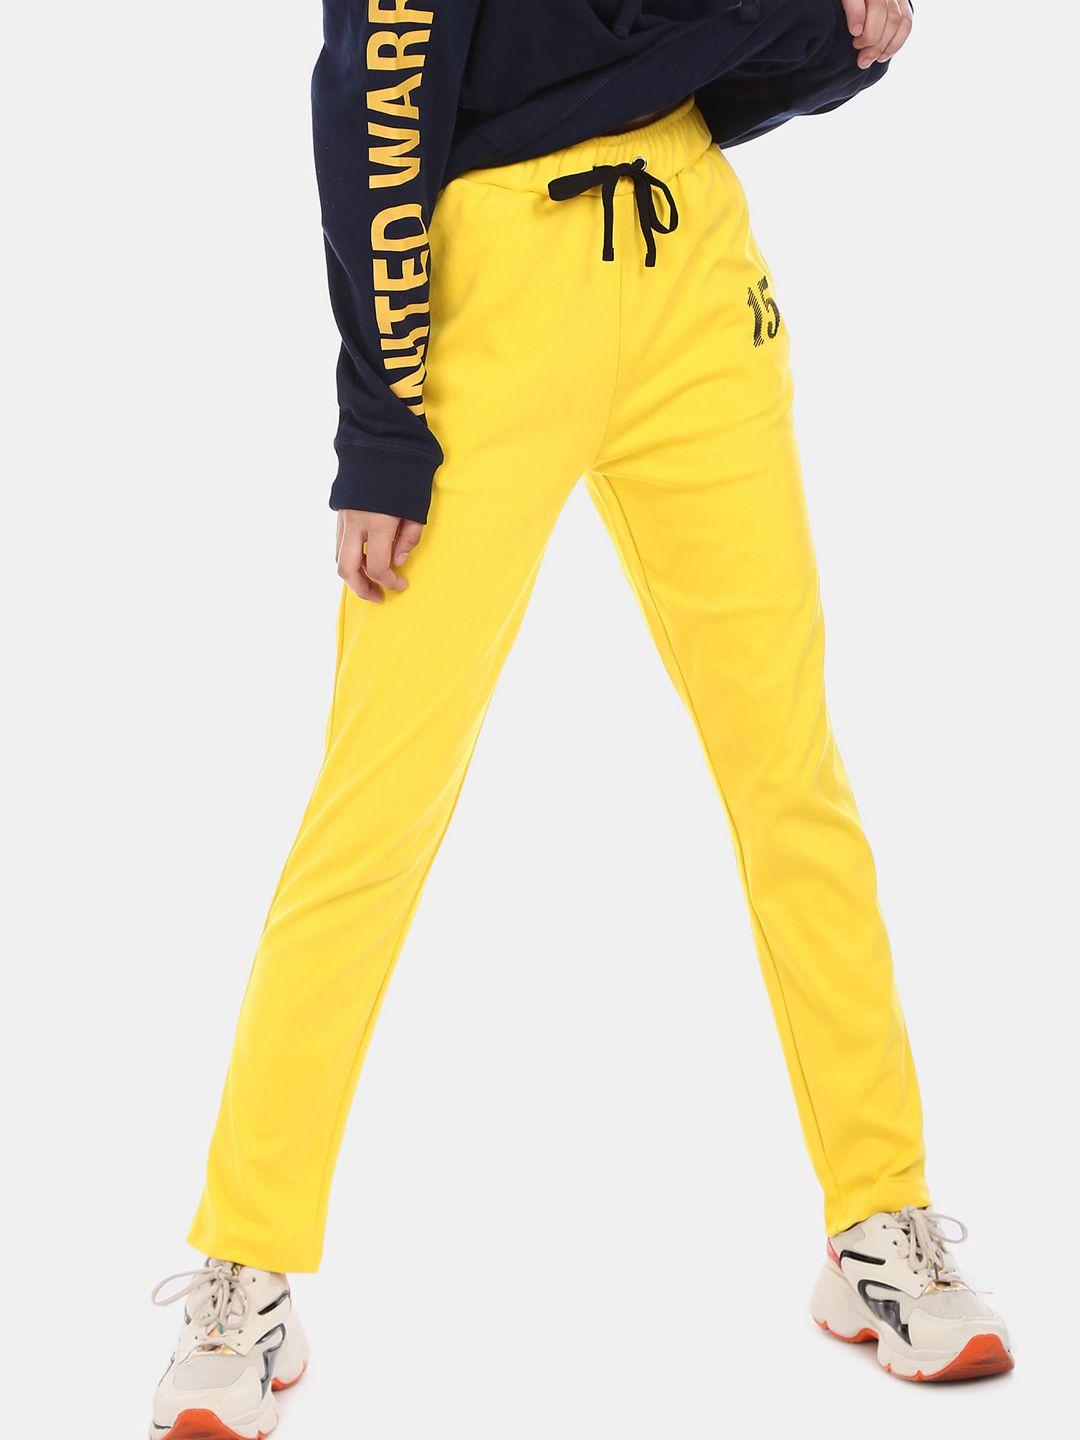 sugr-women-yellow-solid-track-pants